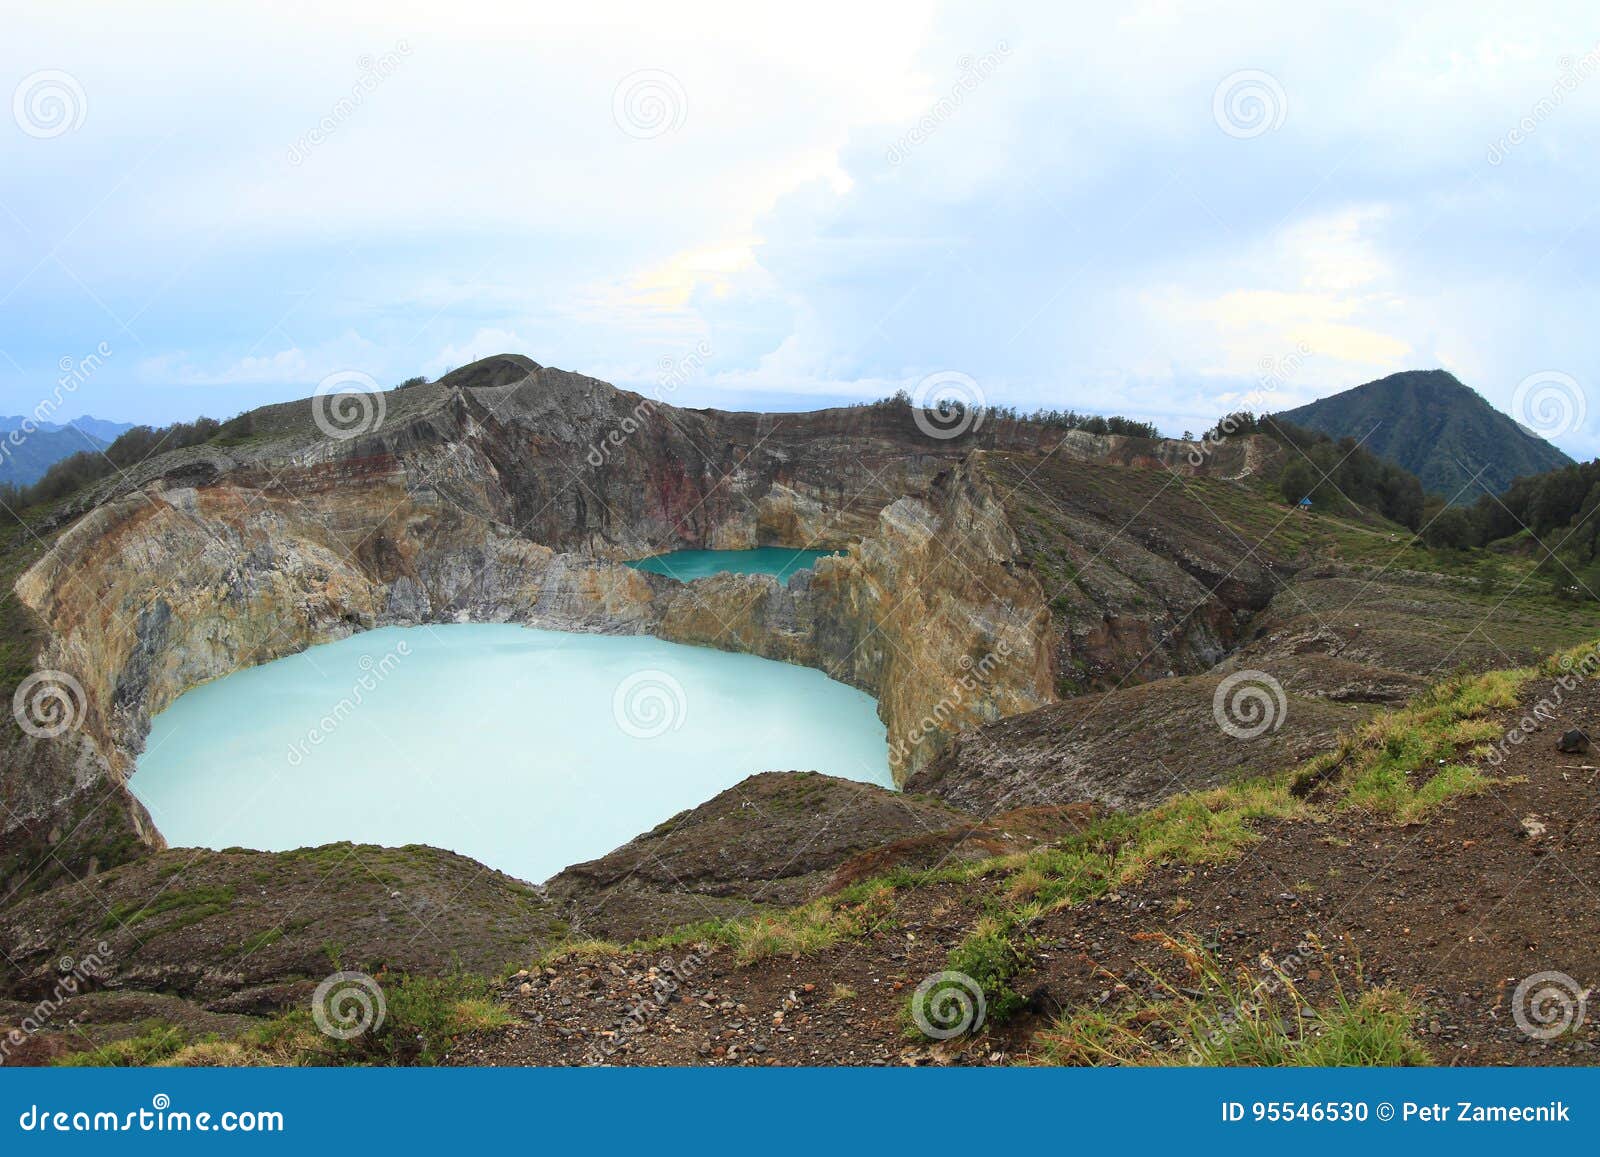 volcanoes kelimutu with unique lakes tap and tin